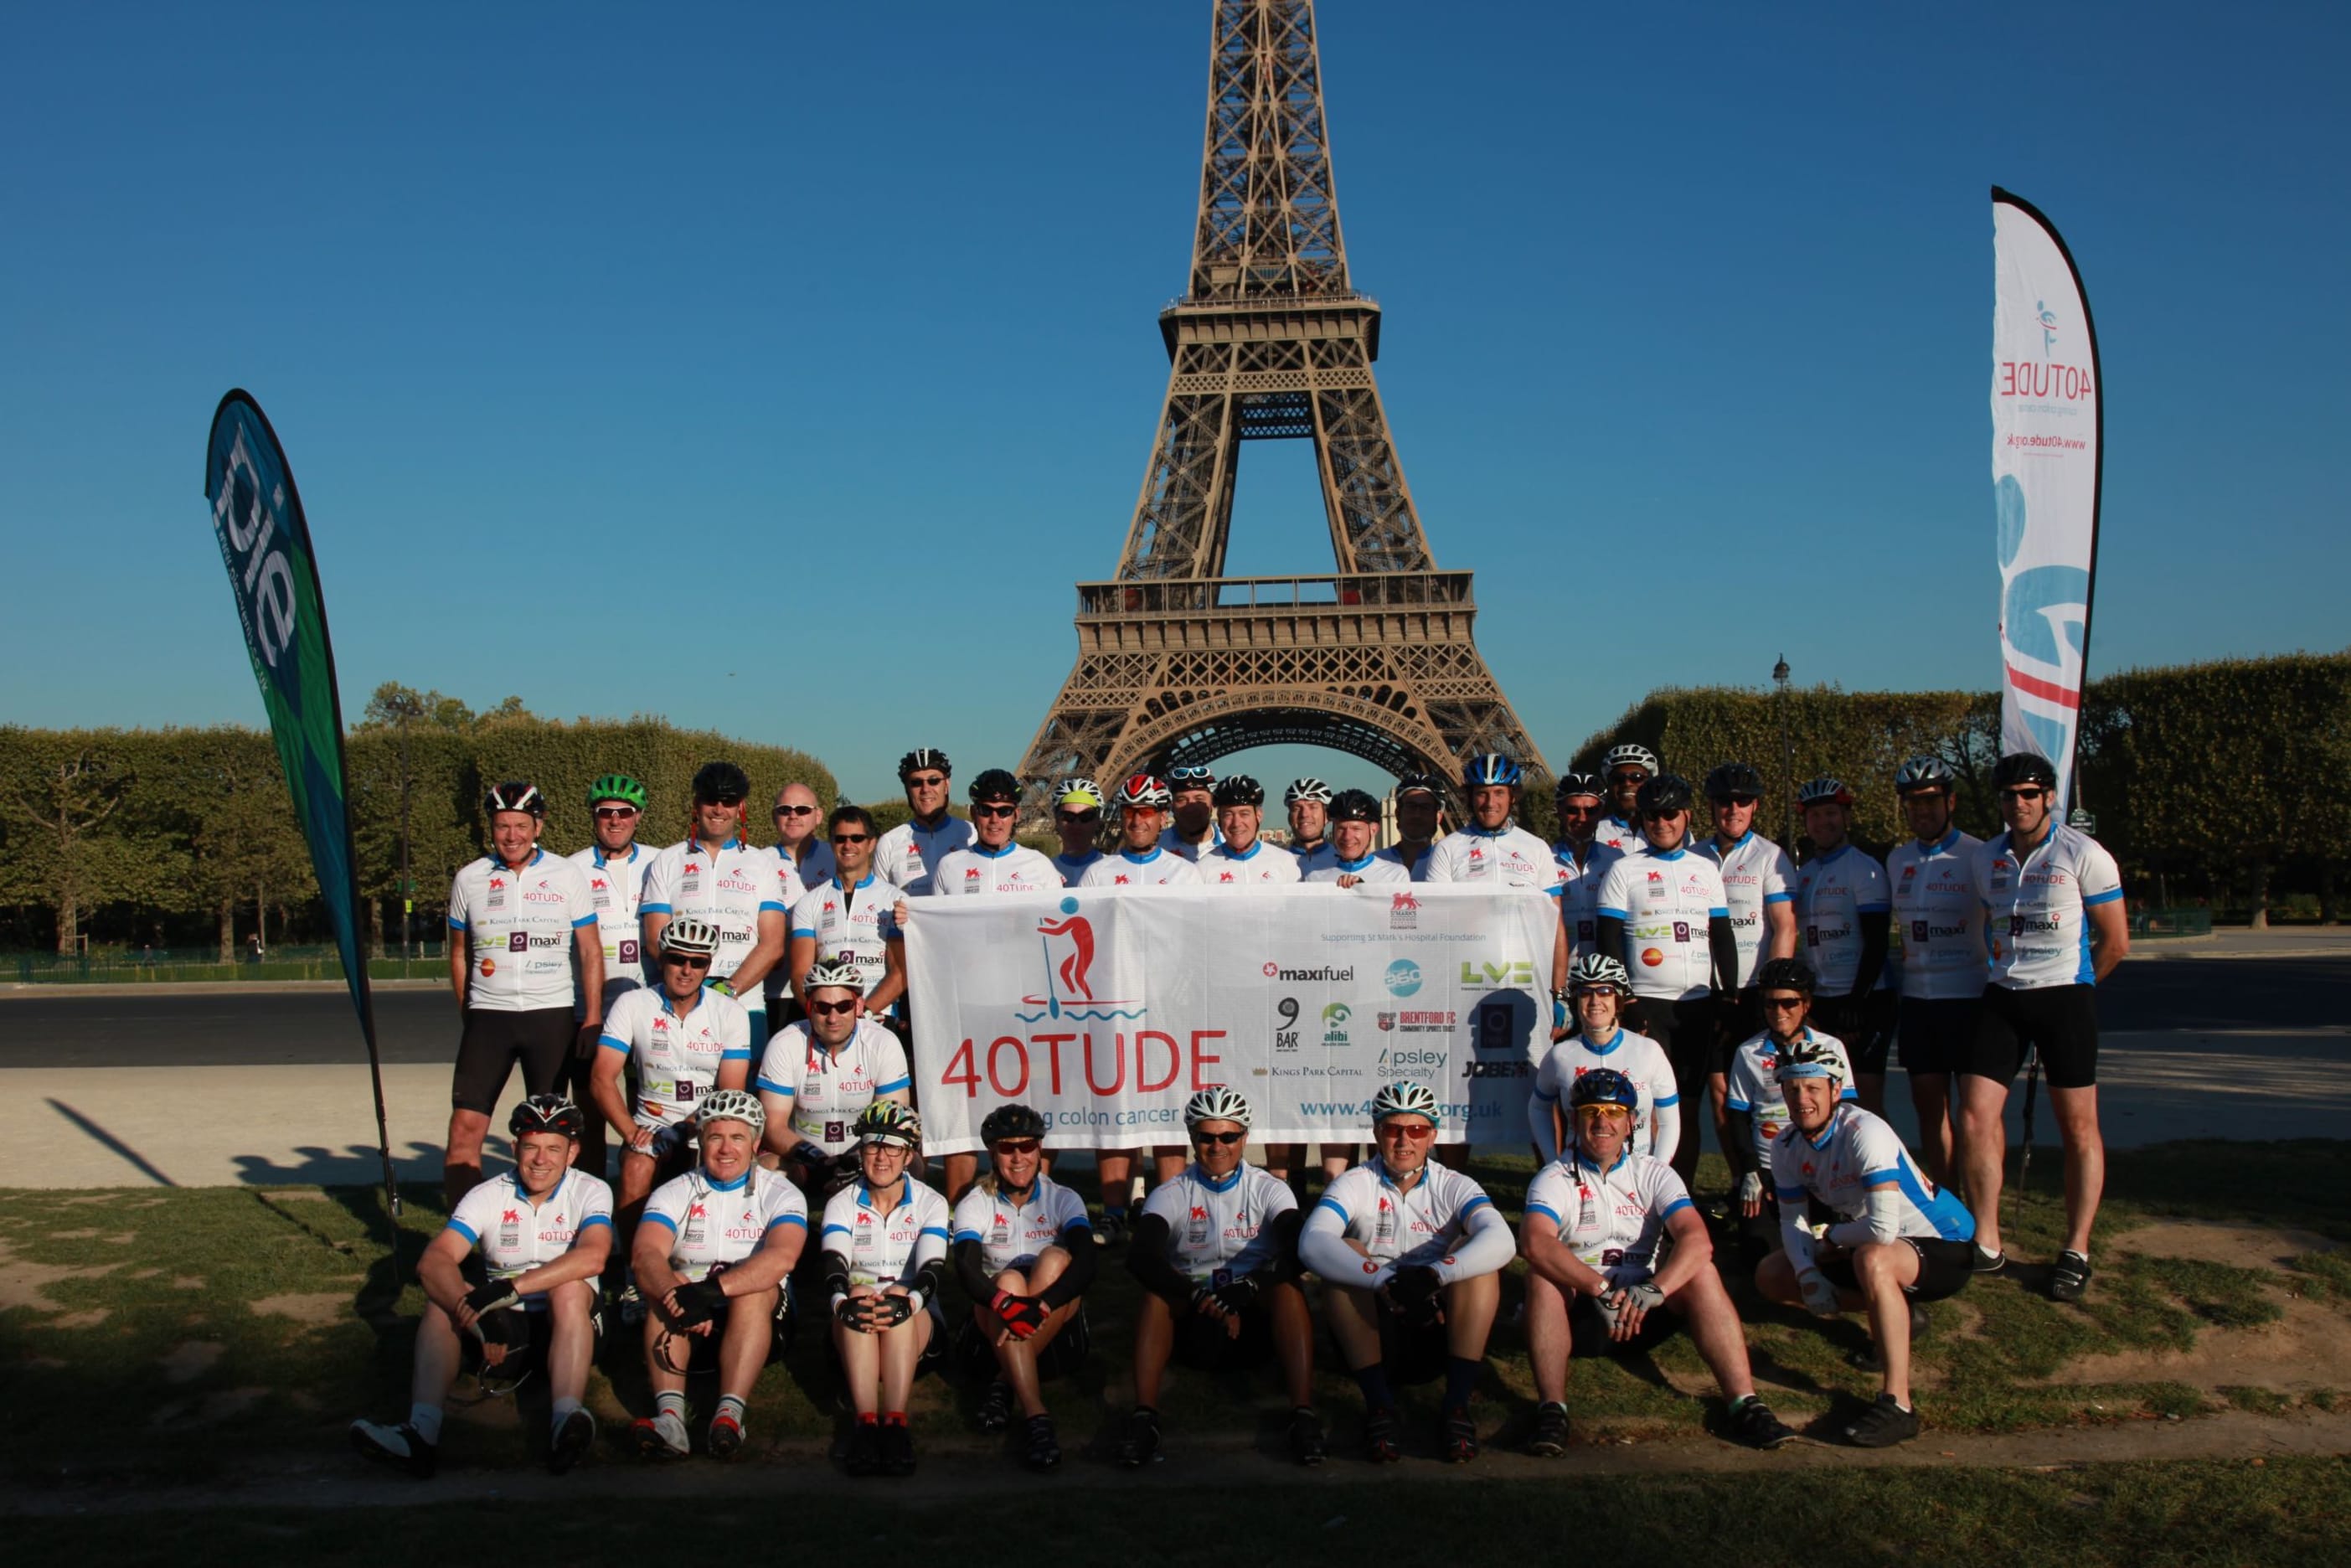 40tude cyclists on Paris to London cycle challenge